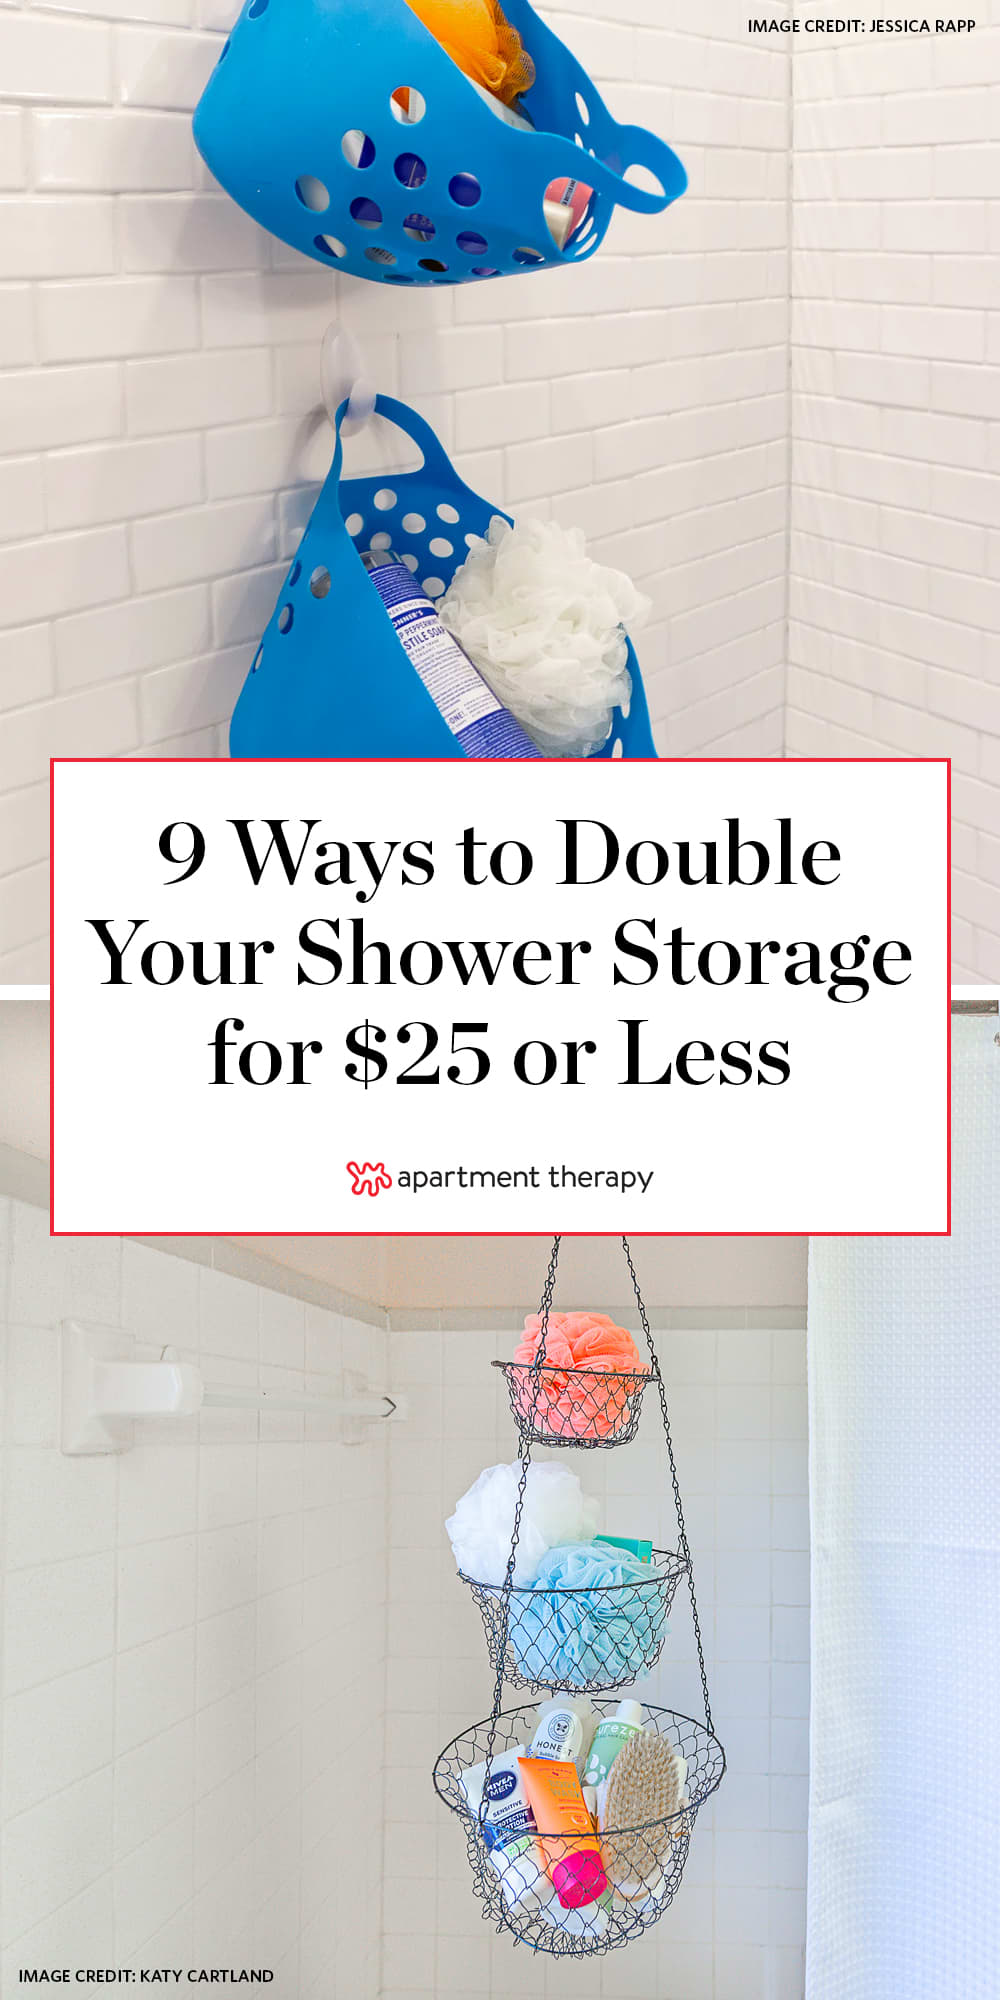 How to Survive Sharing a Shower With These Shower Caddy Hacks - Brit + Co